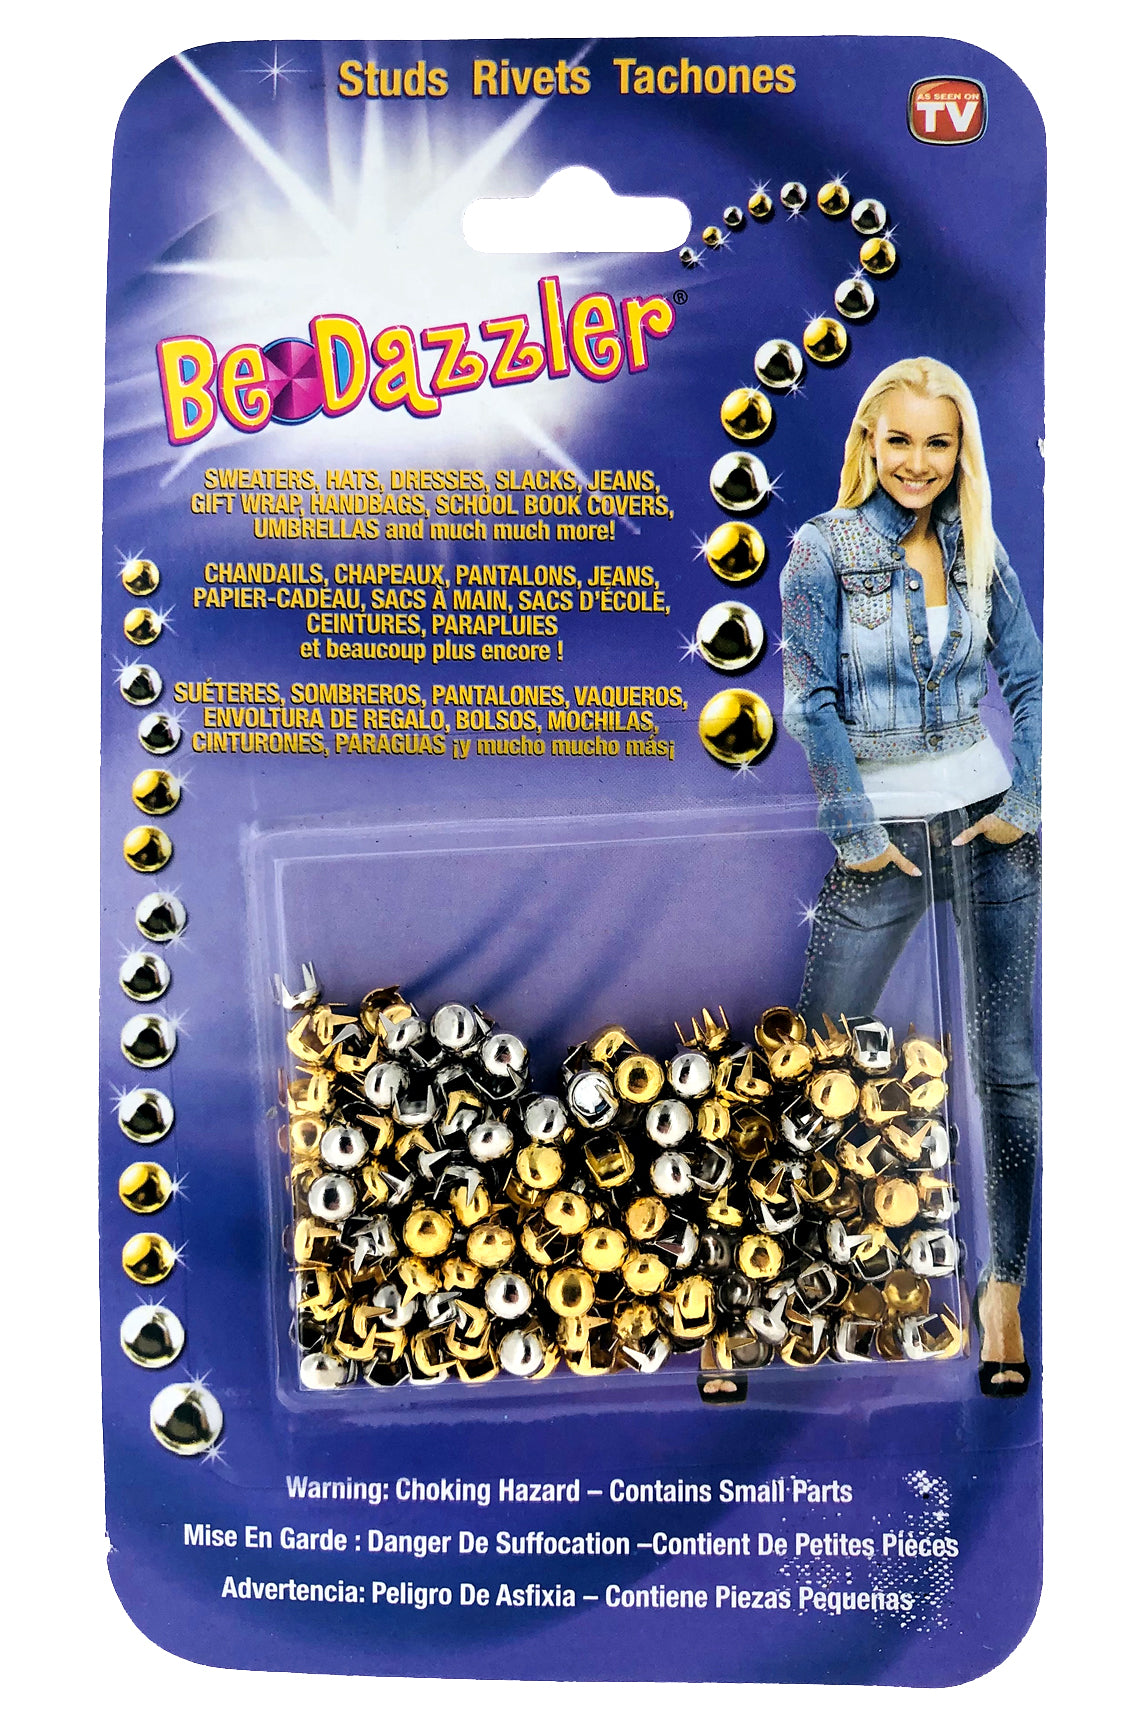 Bedazzler - The Original Bedazzler Rhinestone and Stud Setting